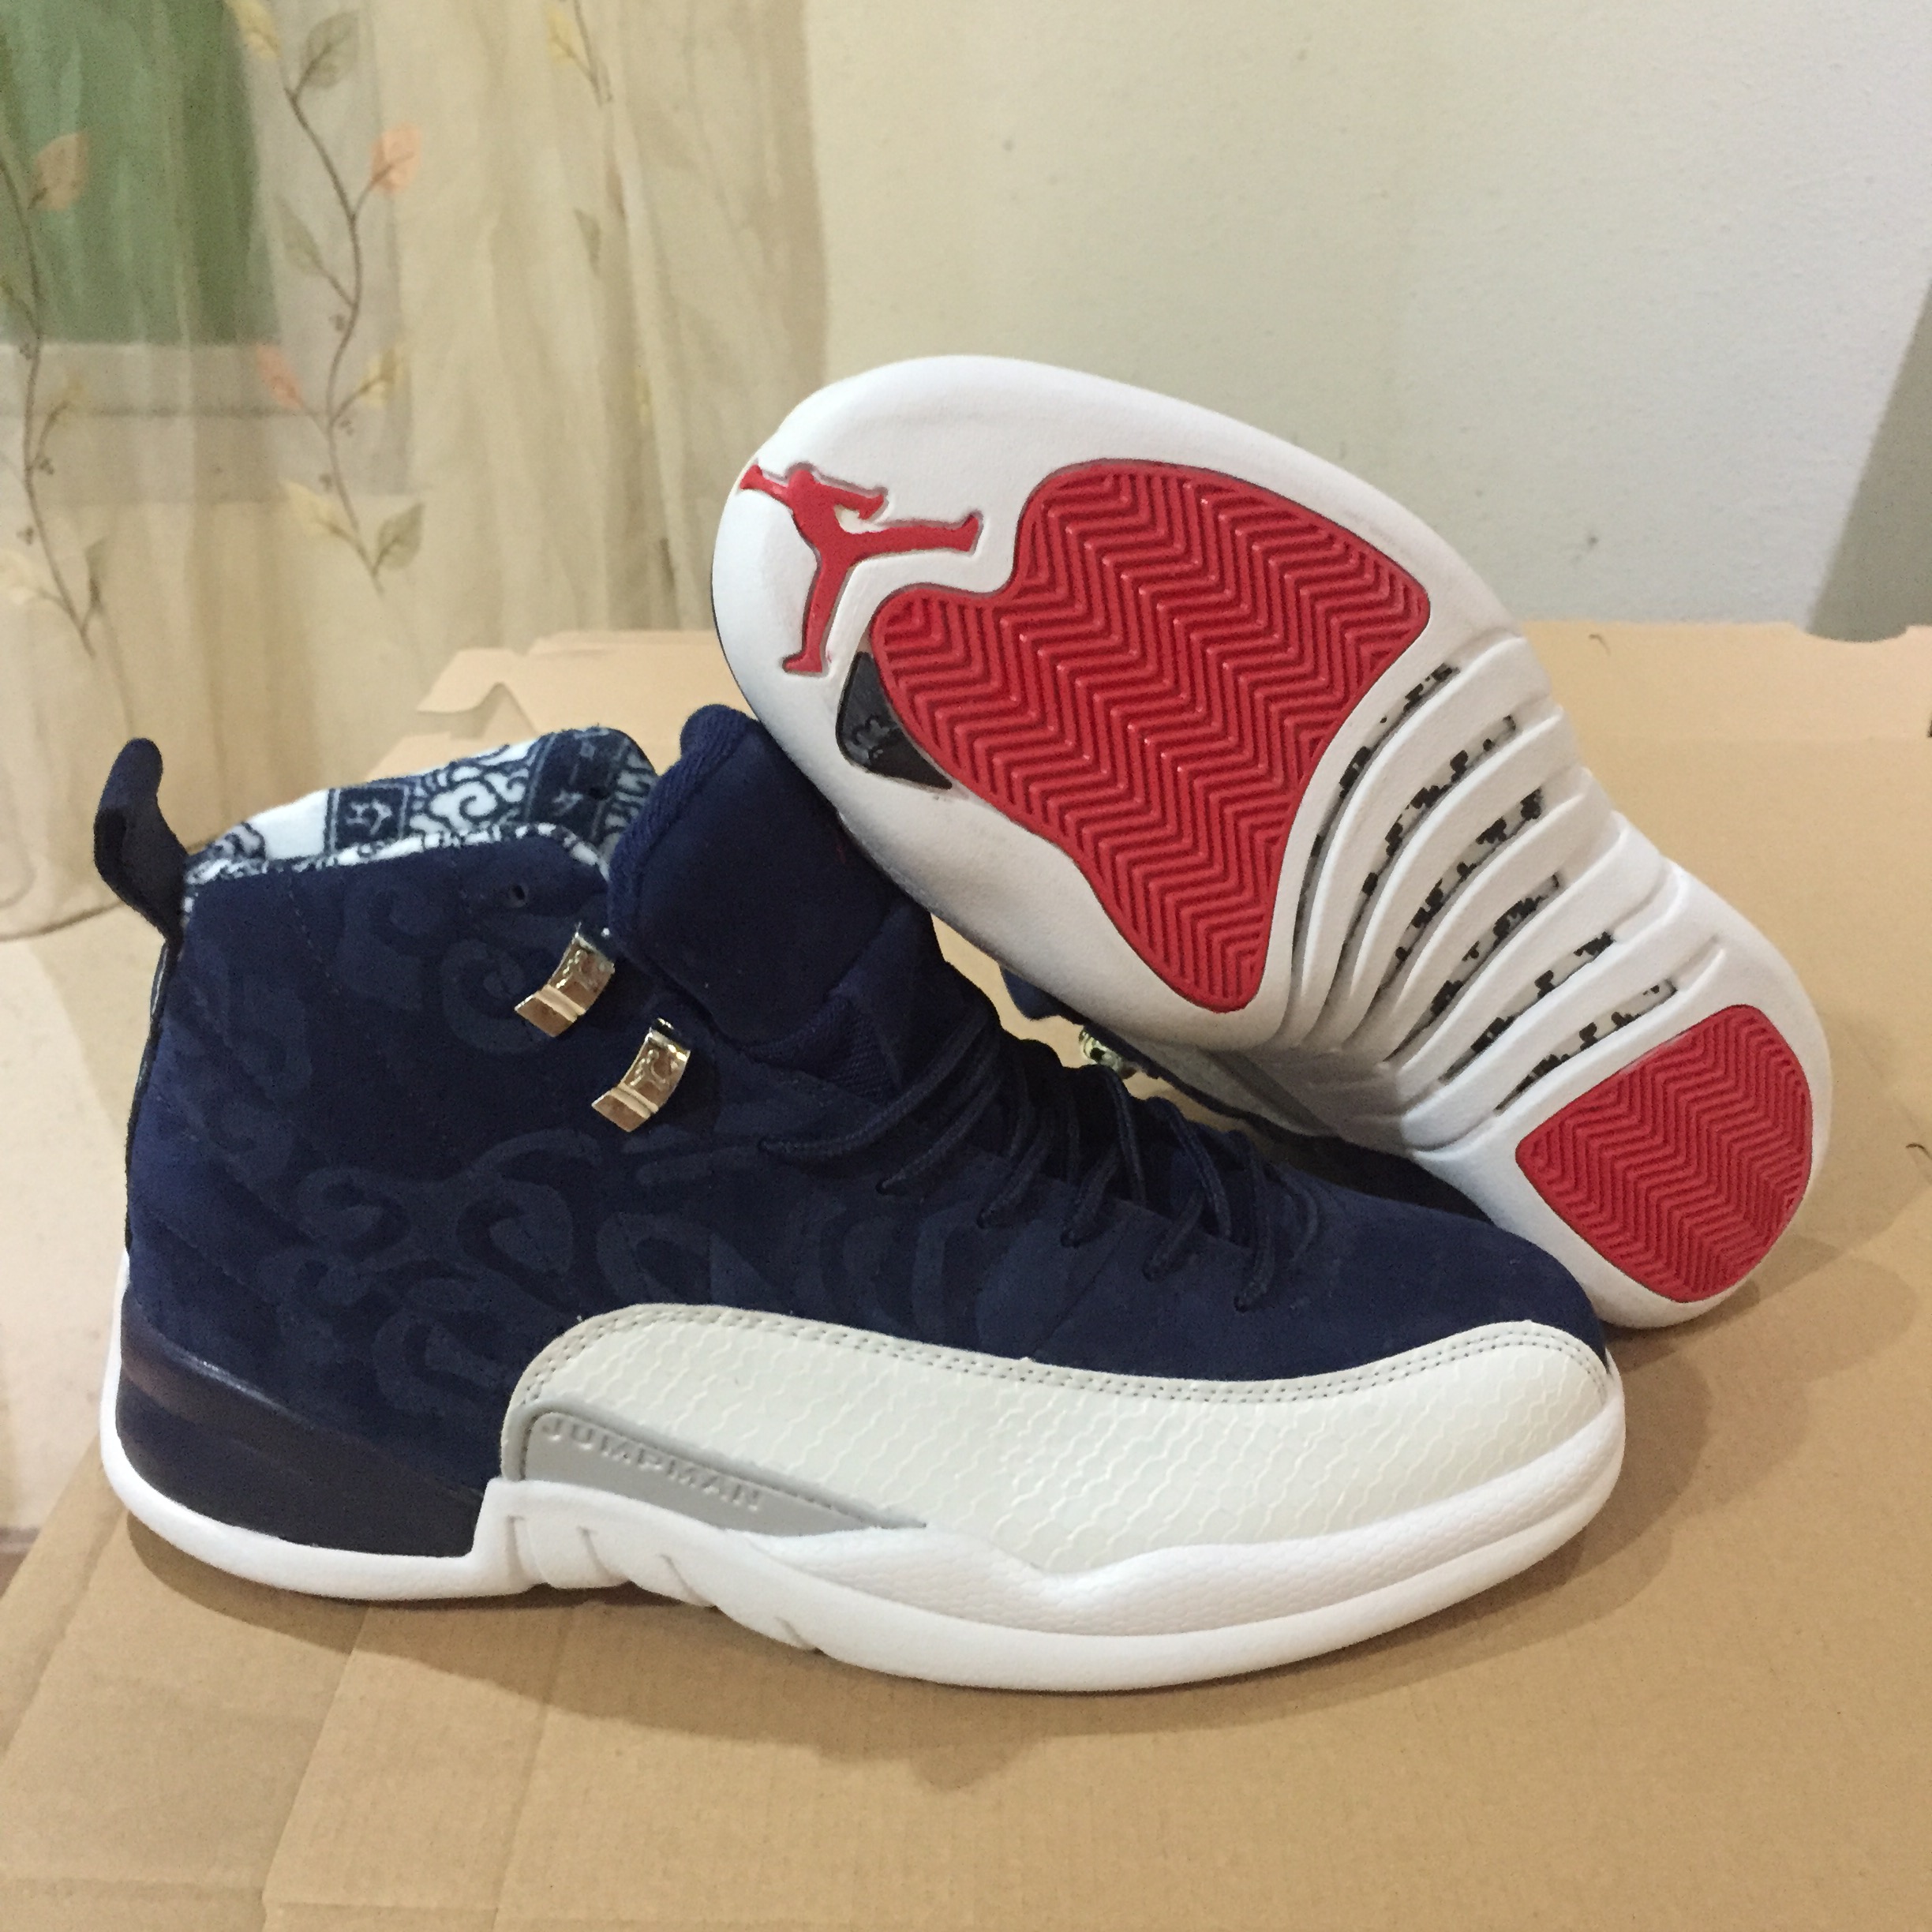 red white and blue 12s